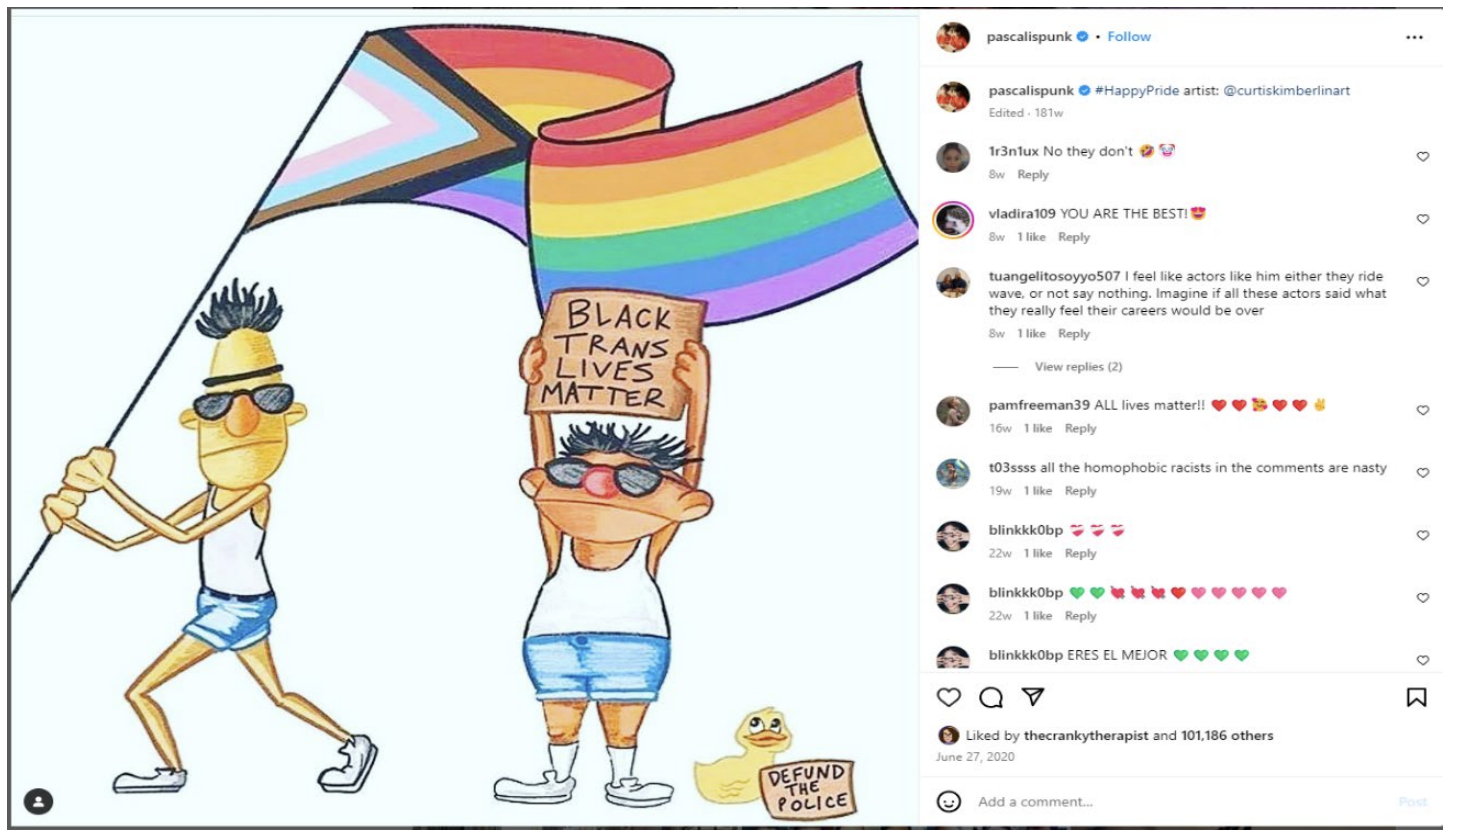 Cartoon of Bert and Ernie holding gay and trans pride flags.